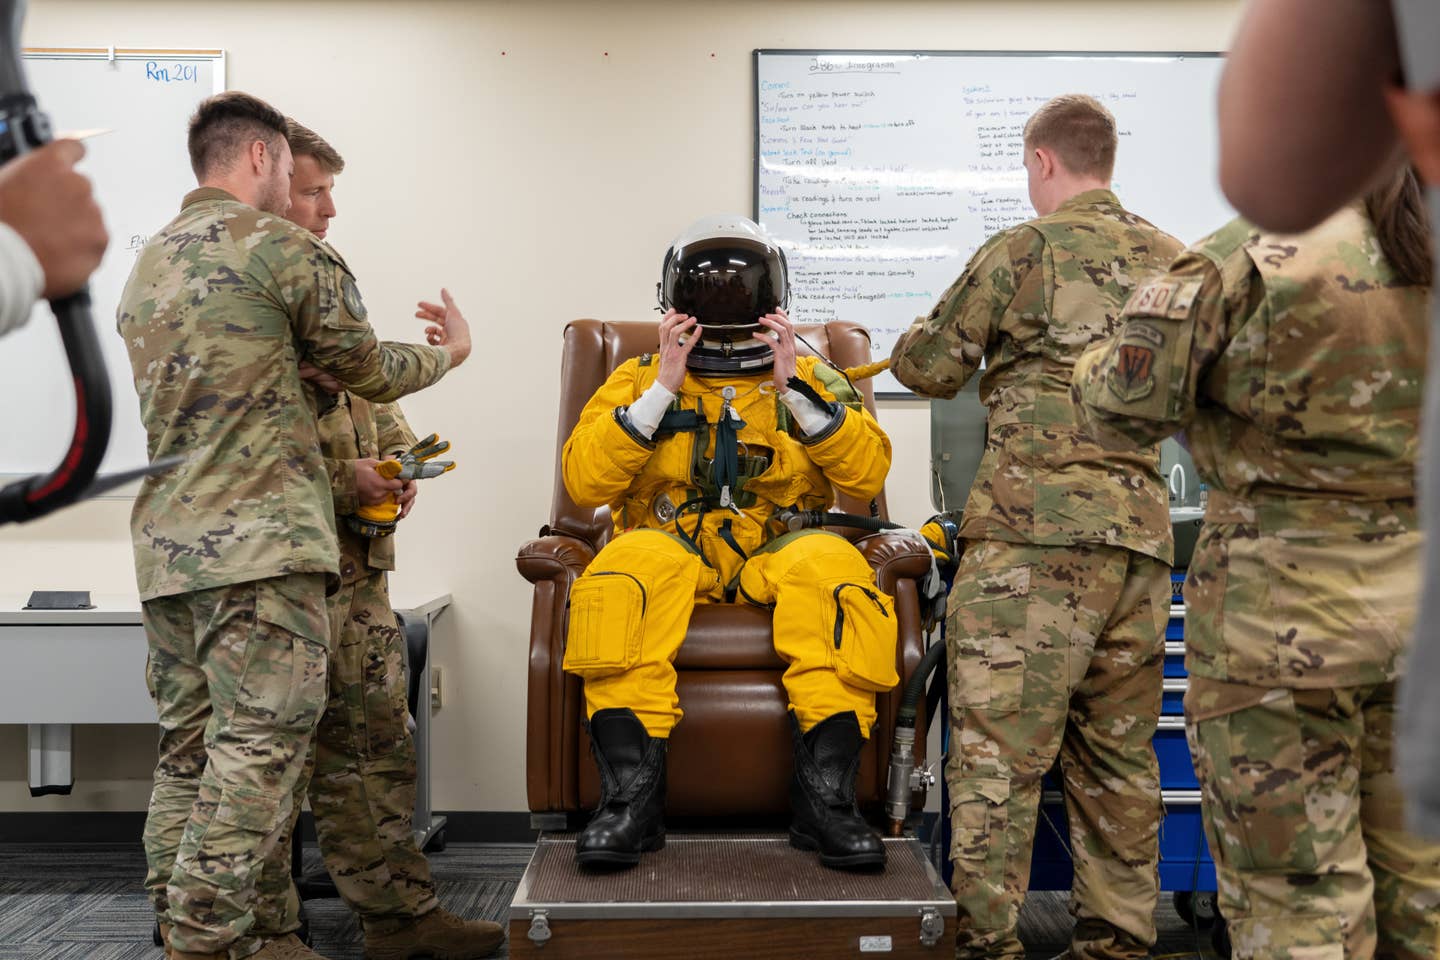 Blair experiencing his fitted pressure suit prior to the actual mission. (Blair Bunting)